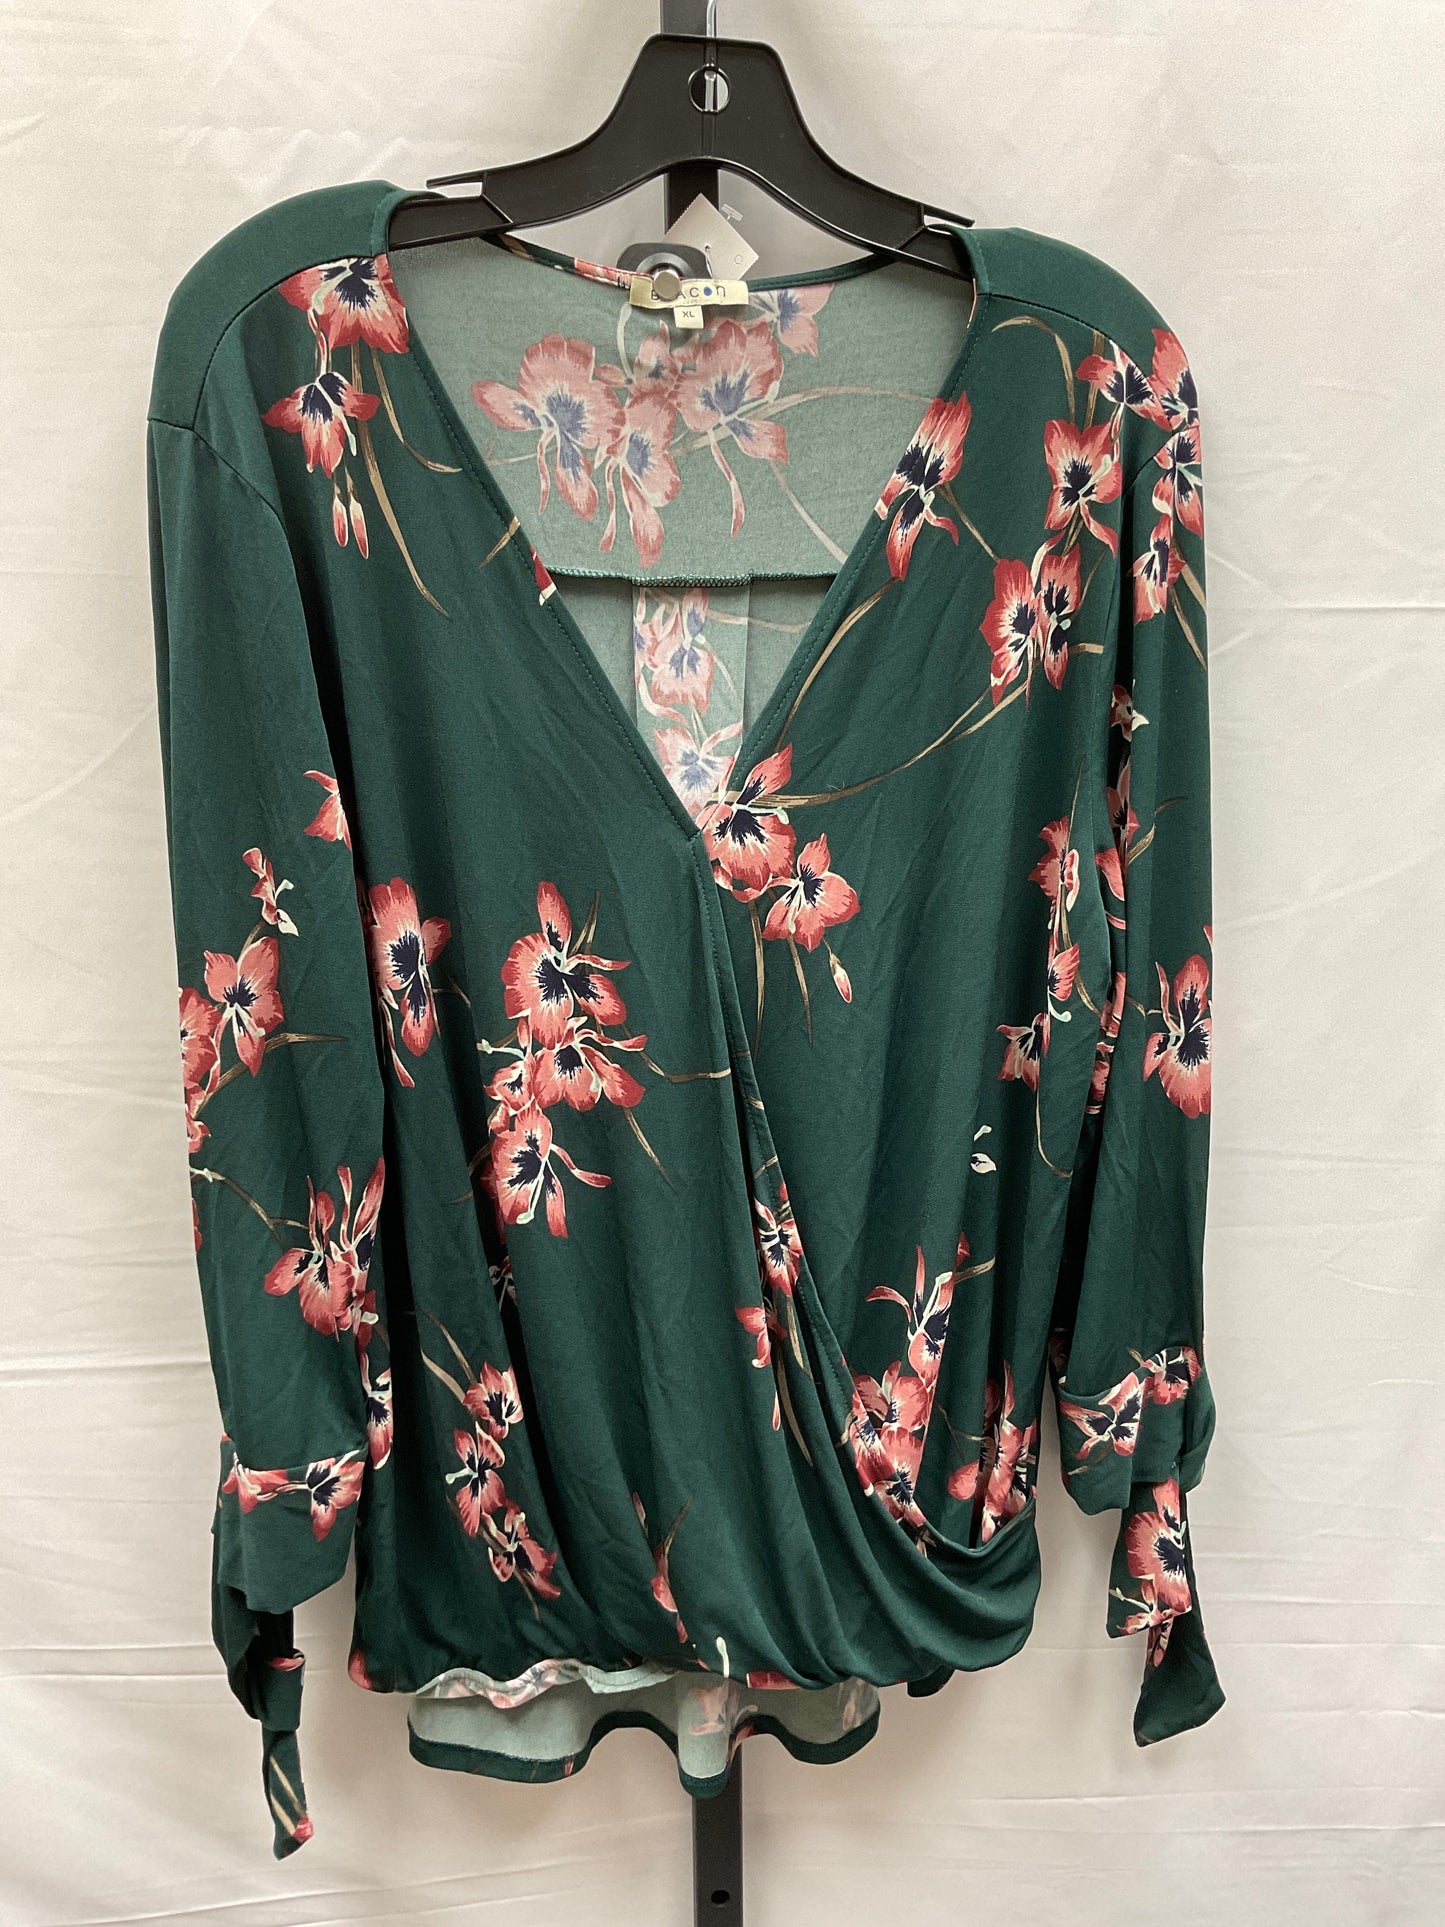 Floral Print Top Long Sleeve Clothes Mentor, Size Xl